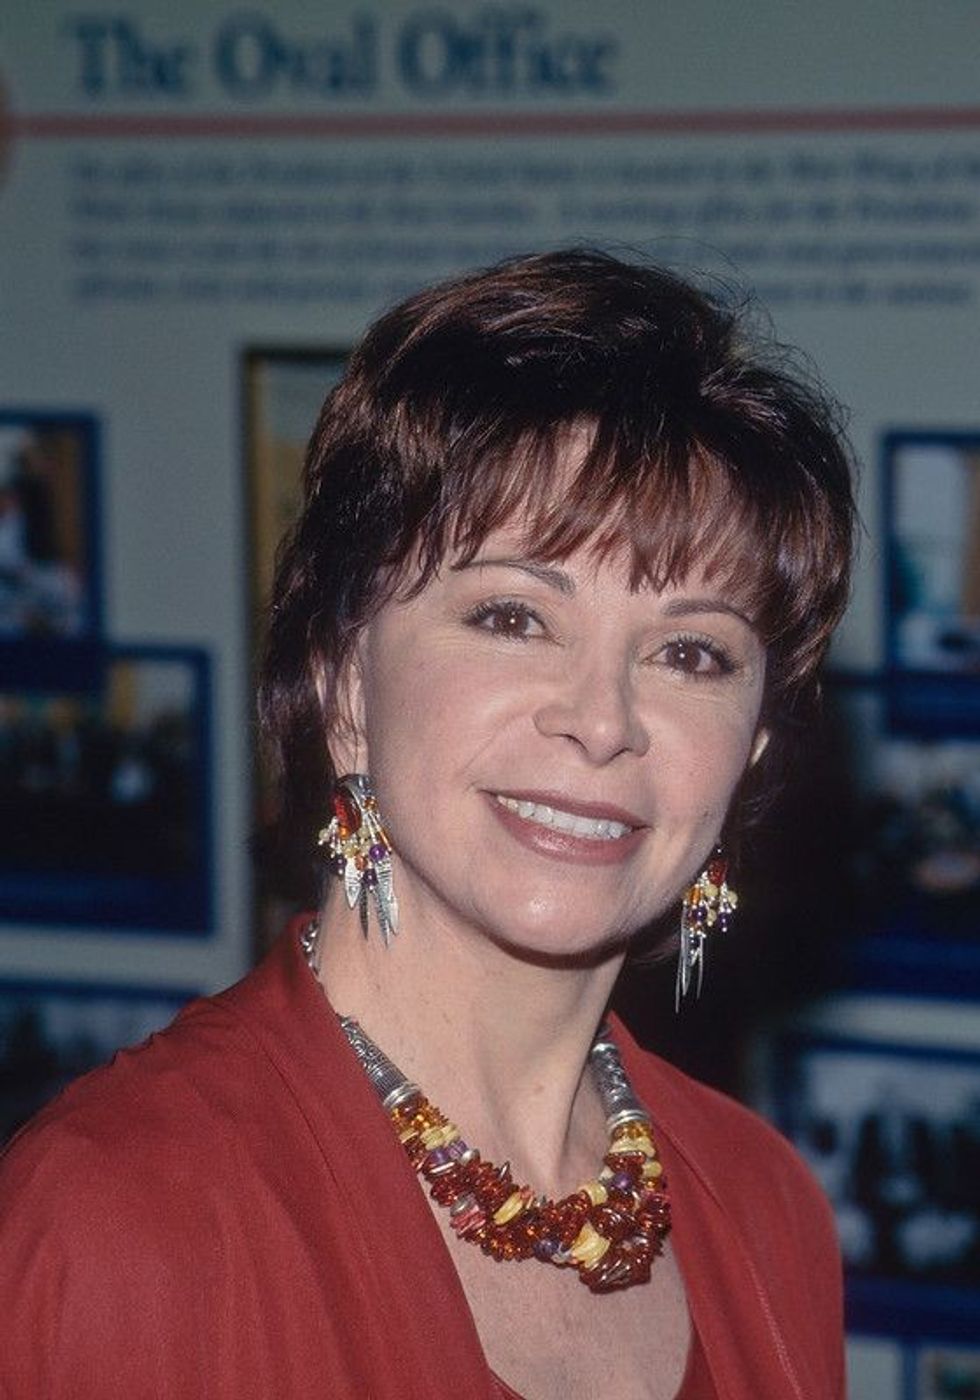 A beautiful picture of Isabel Allende from an event